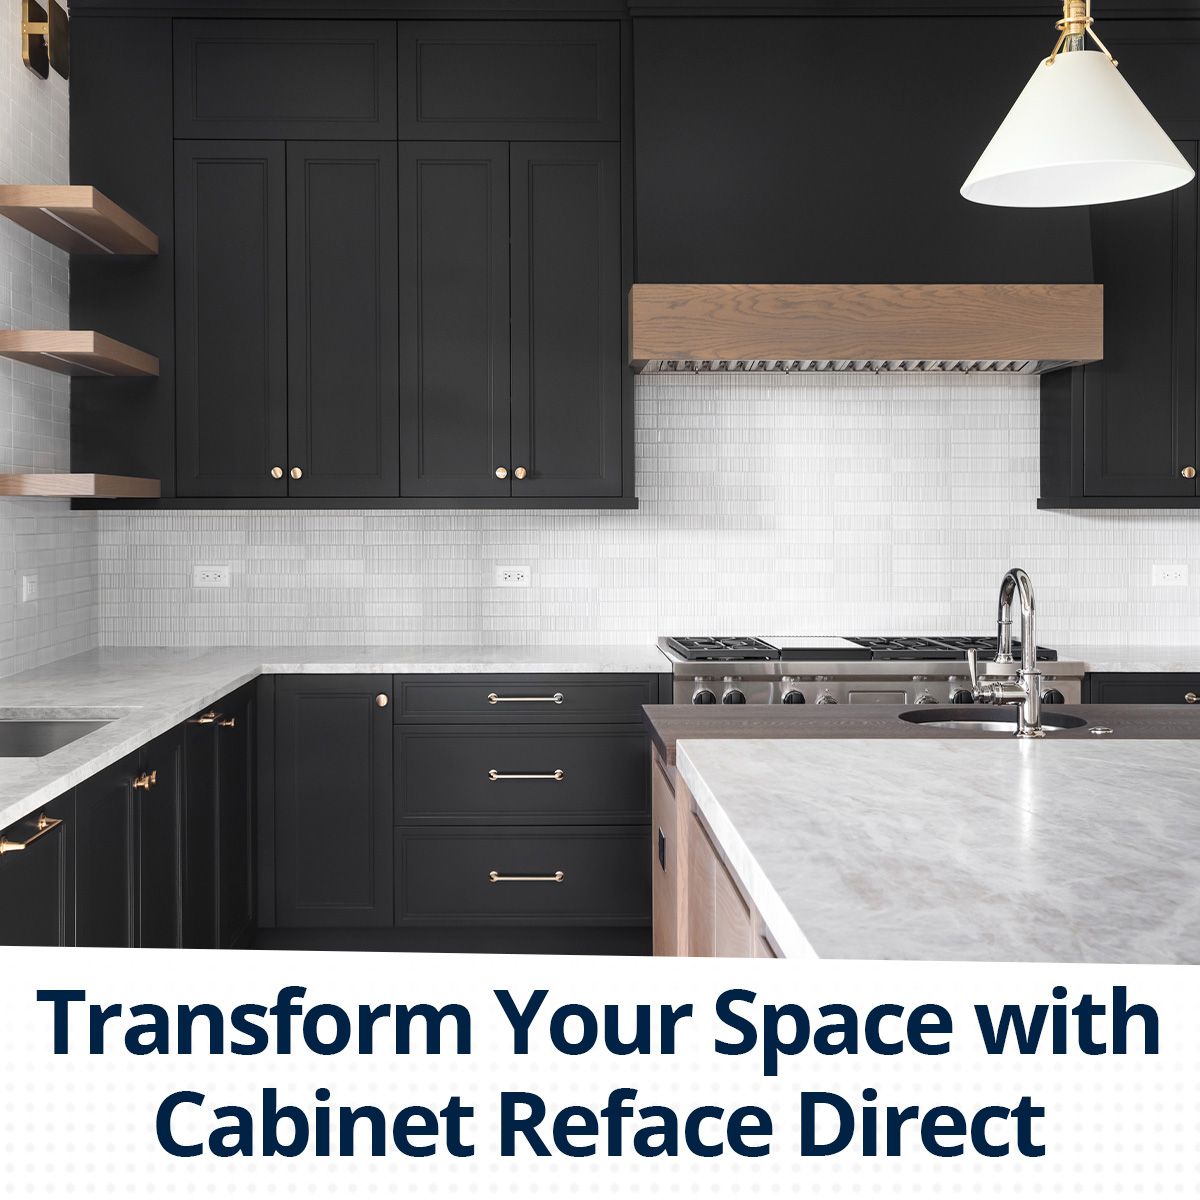 Transform Your Space with Cabinet Reface Direct